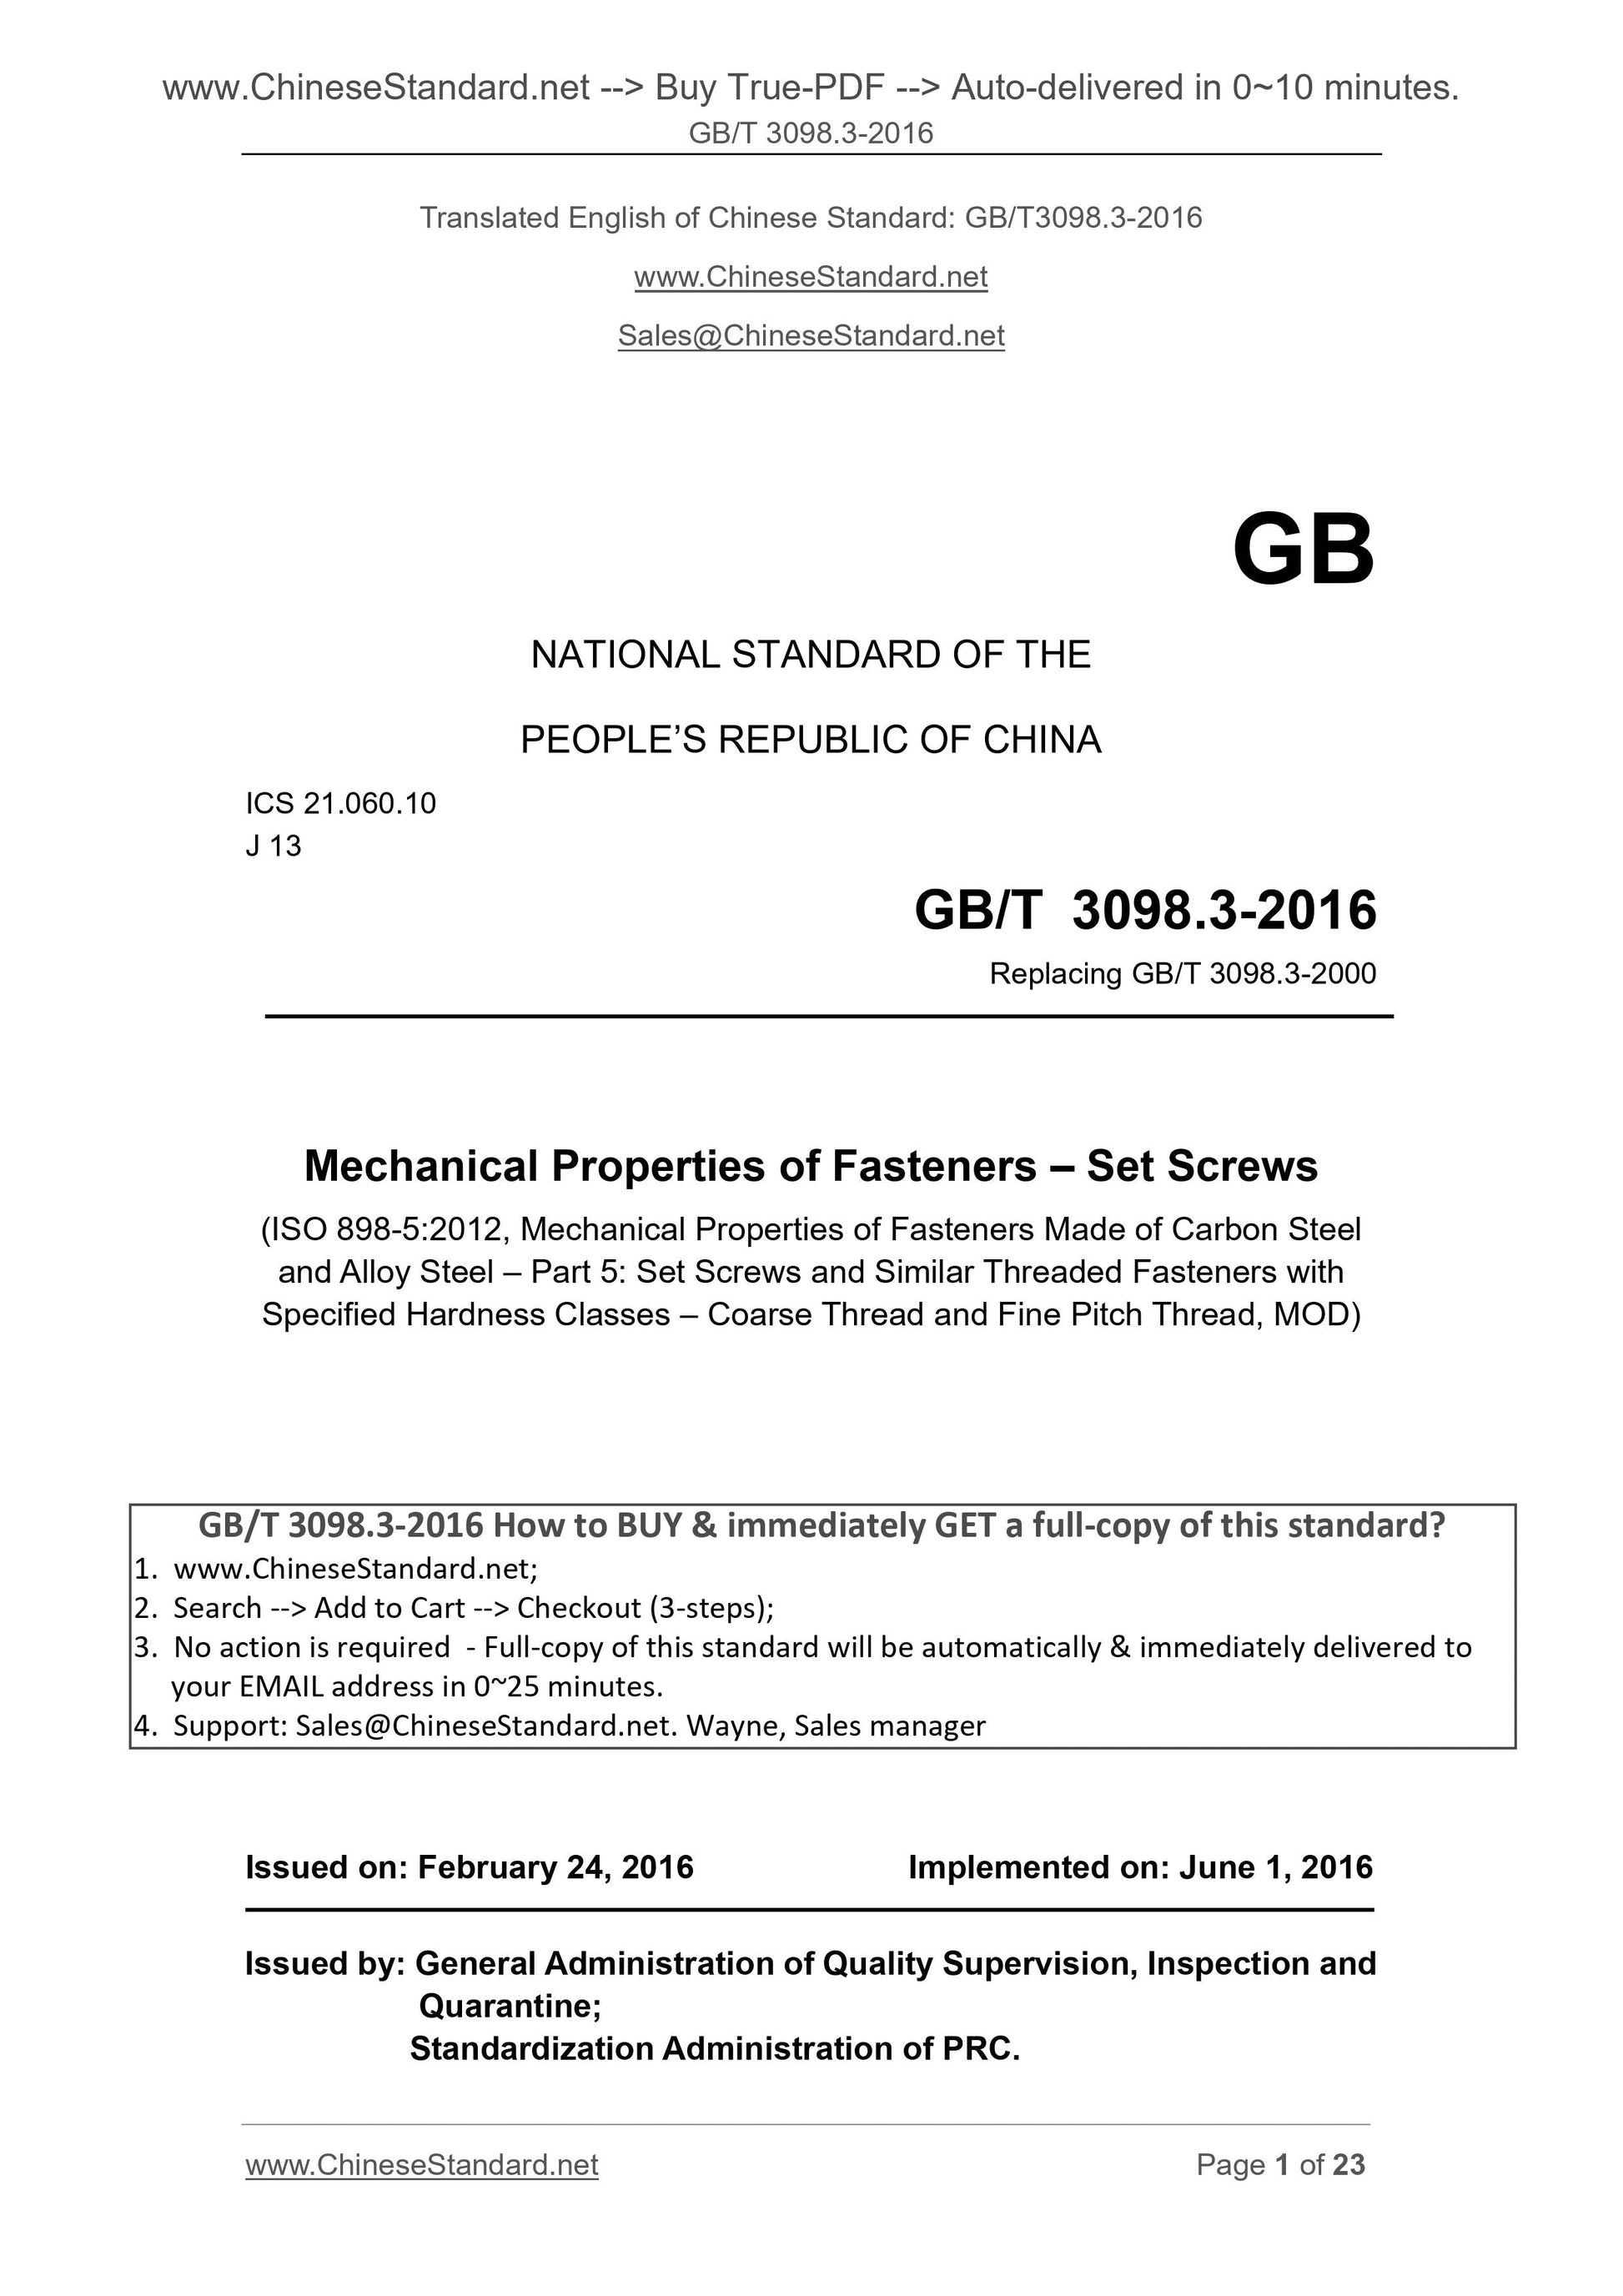 GB/T 3098.3-2016 Page 1